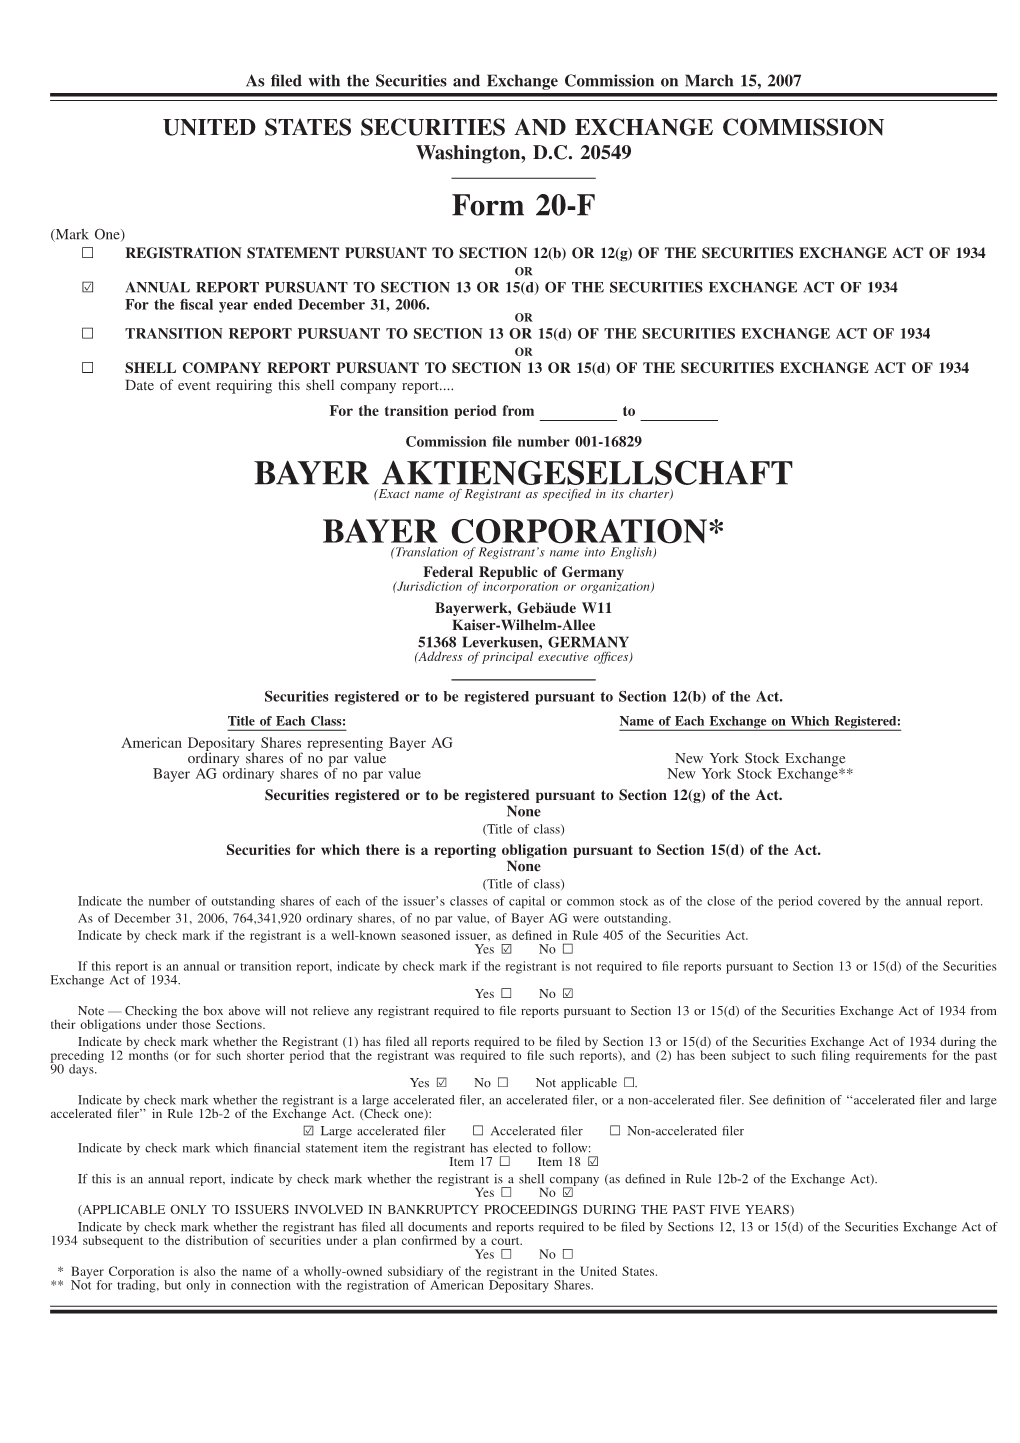 Bayer AG Form 20-F Filed on March 15, 2007